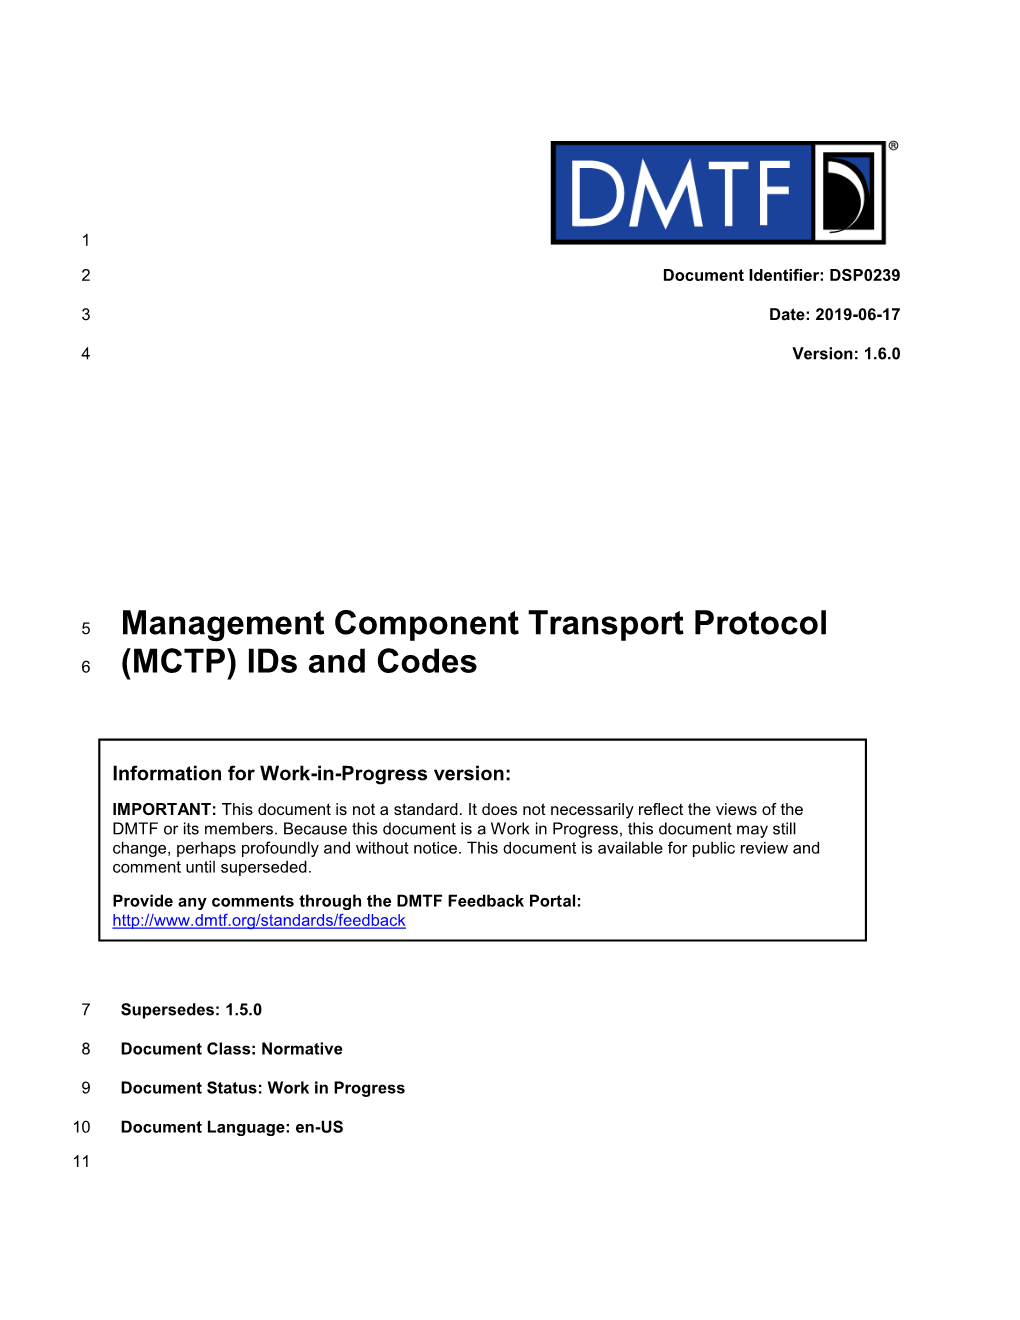 Management Component Transport Protocol (MCTP) Ids and Codes DSP0239